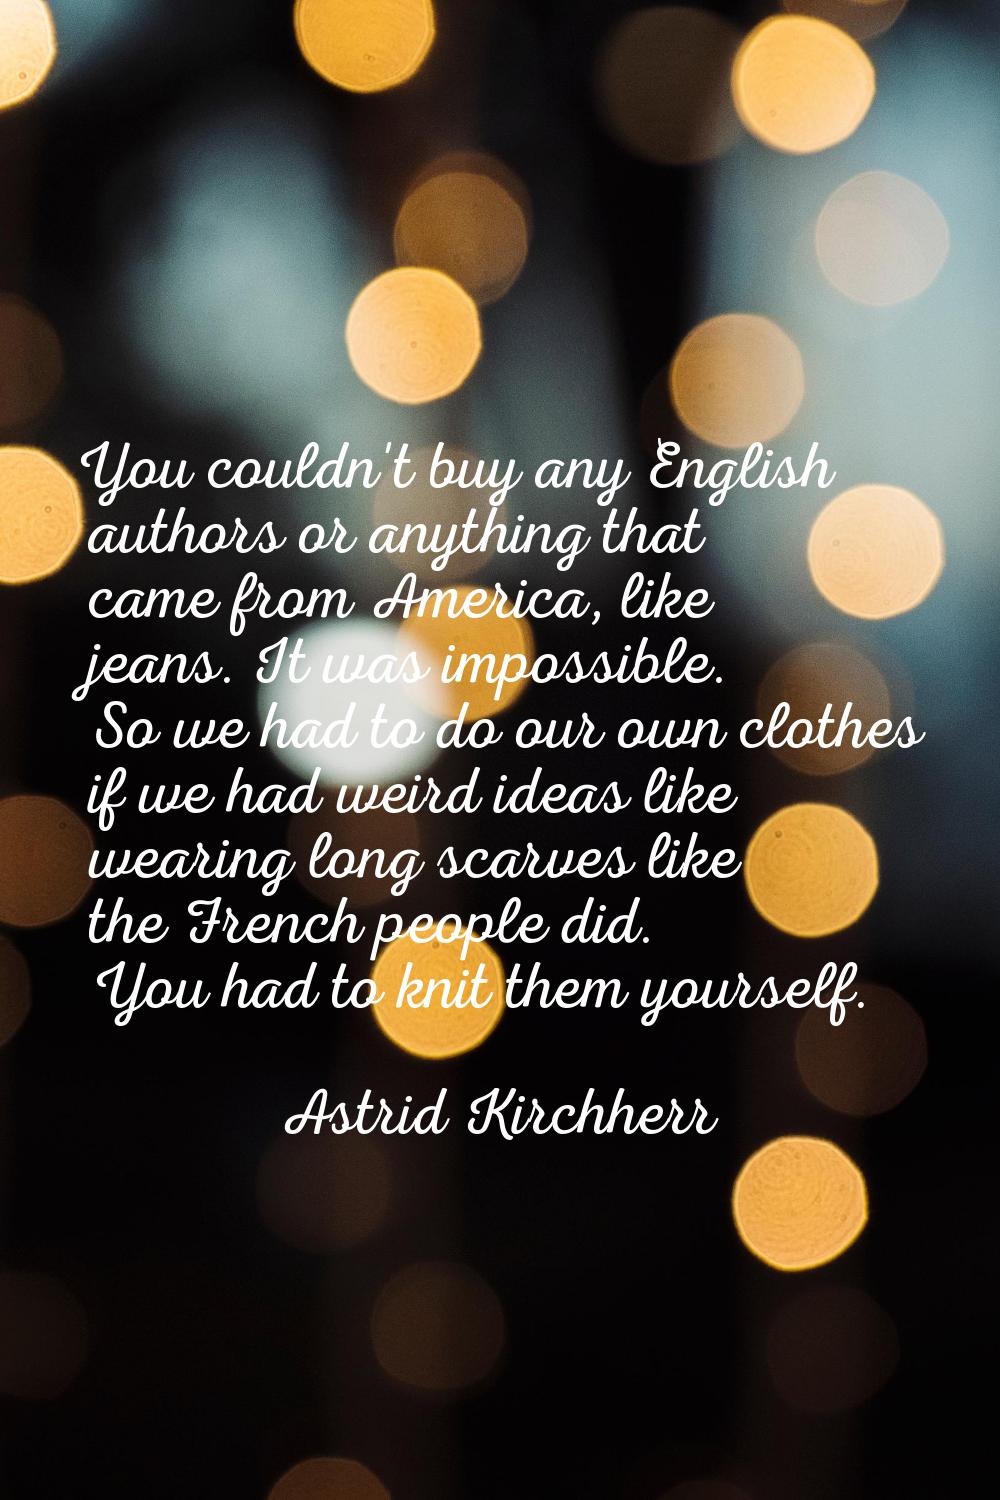 You couldn't buy any English authors or anything that came from America, like jeans. It was impossi